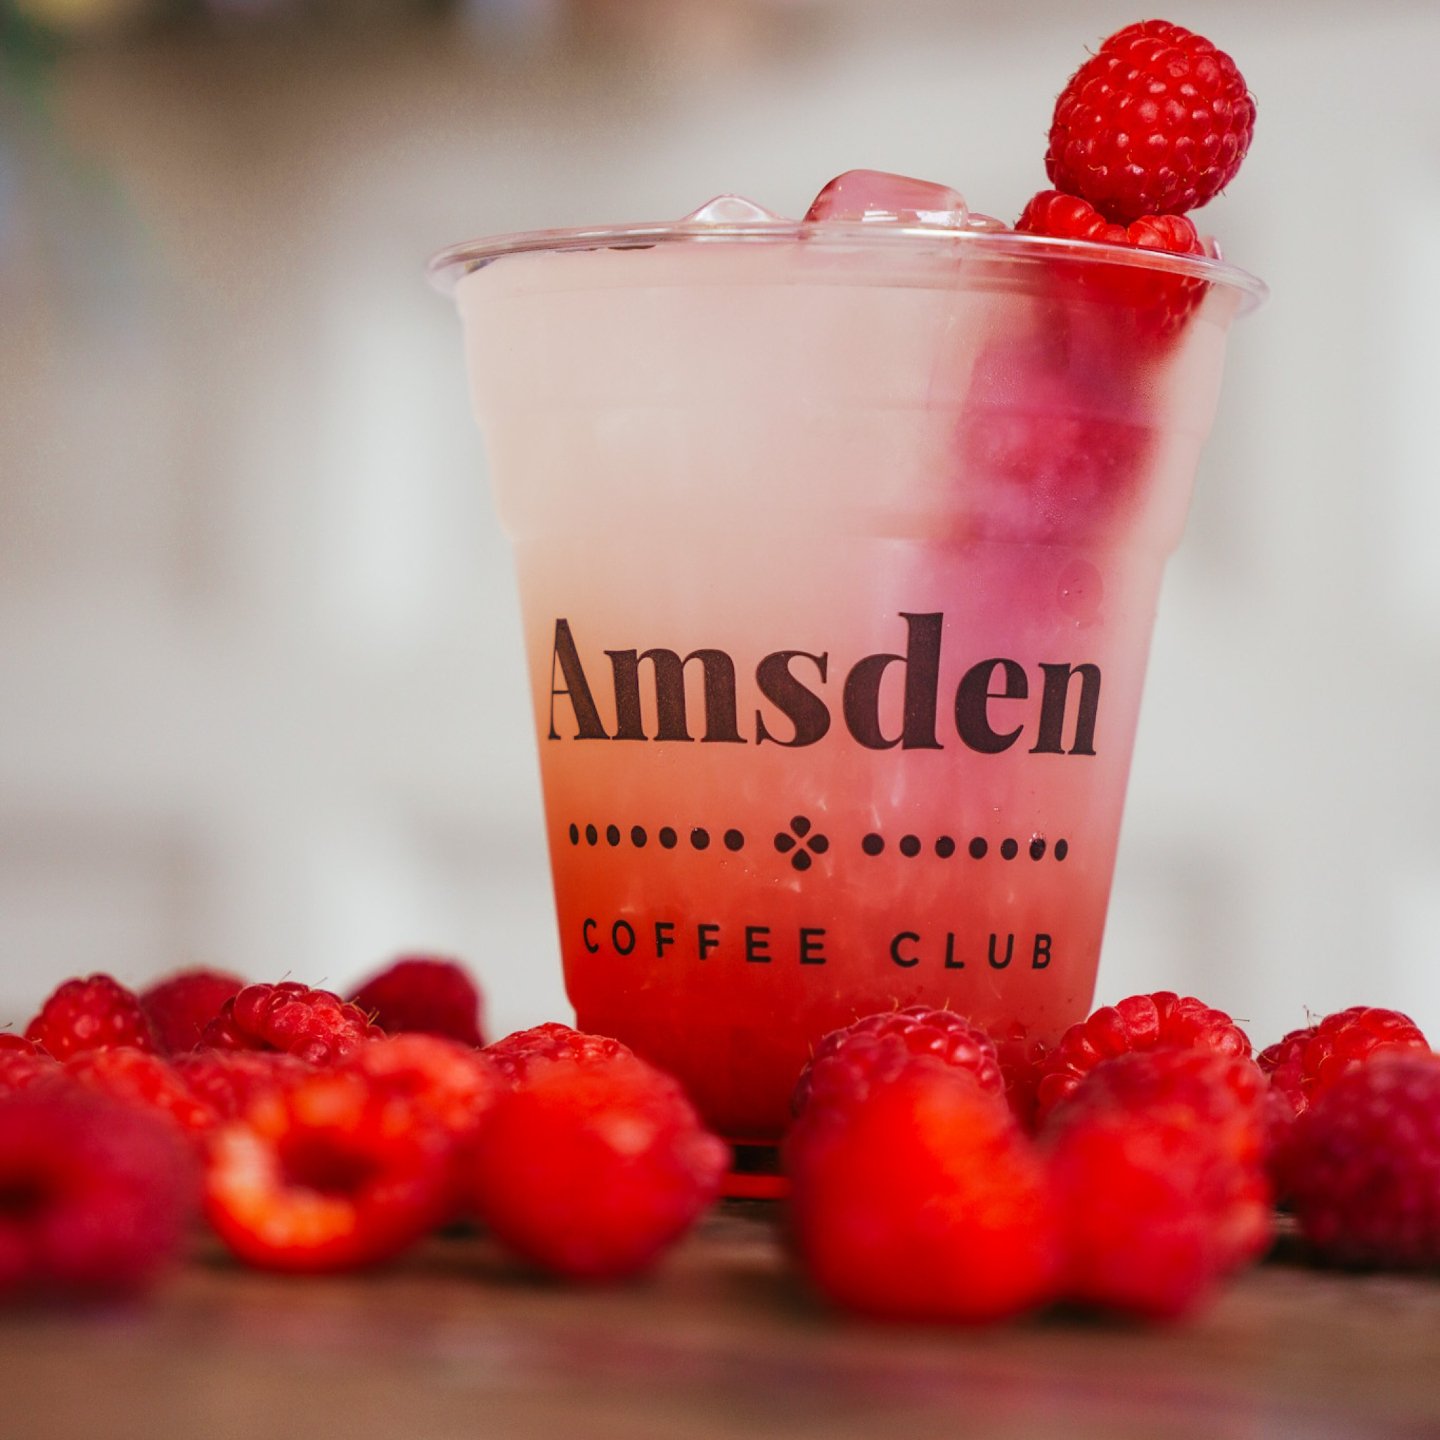 Feeling a little sour? Let us sweeten up your day with our tangy Raspberry Lemonade! 🍋💖 It's like sunshine in a glass! 

#theamsden #amsden #amsdencoffeeclub #gathermercantile #sharethelex #versailles #shoplocalky #explorekentucky #coffeesesh #coff